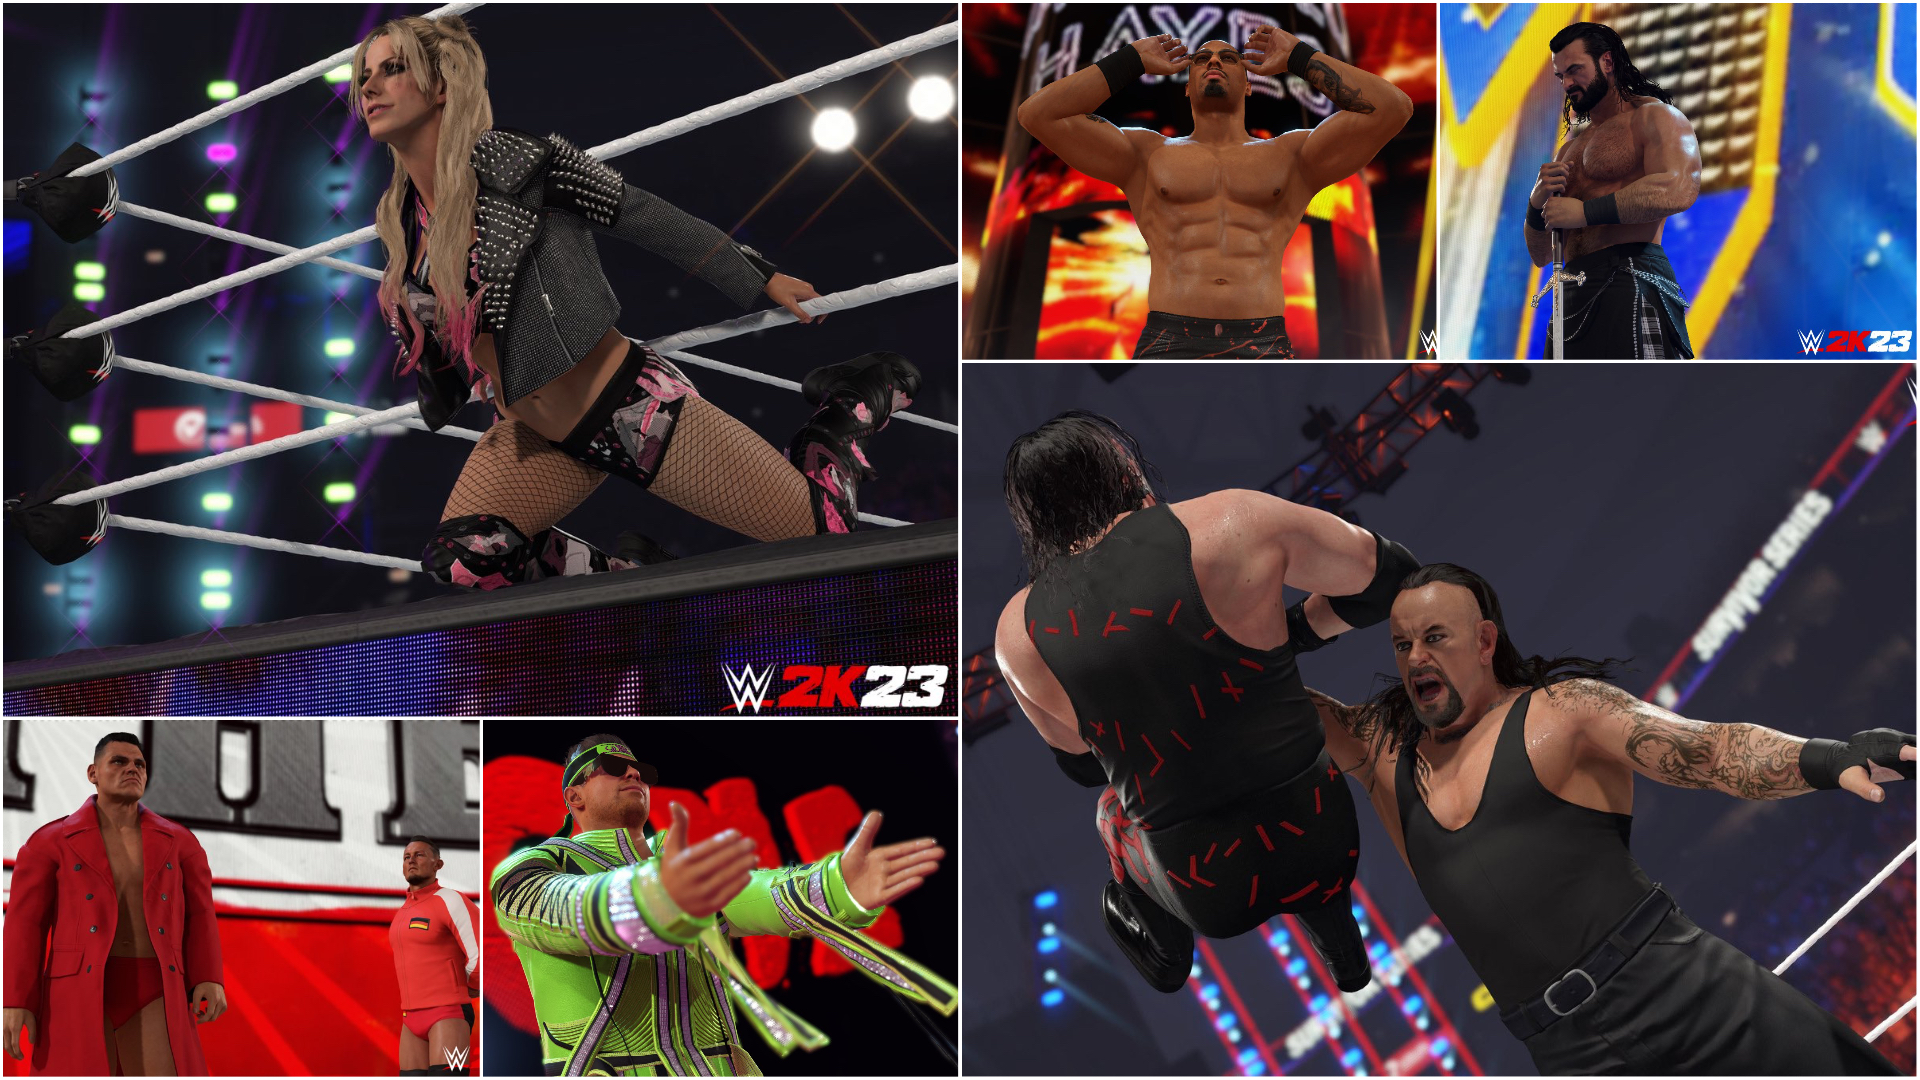 All The WWE 2K22 Roster Members That Are No Longer in WWE